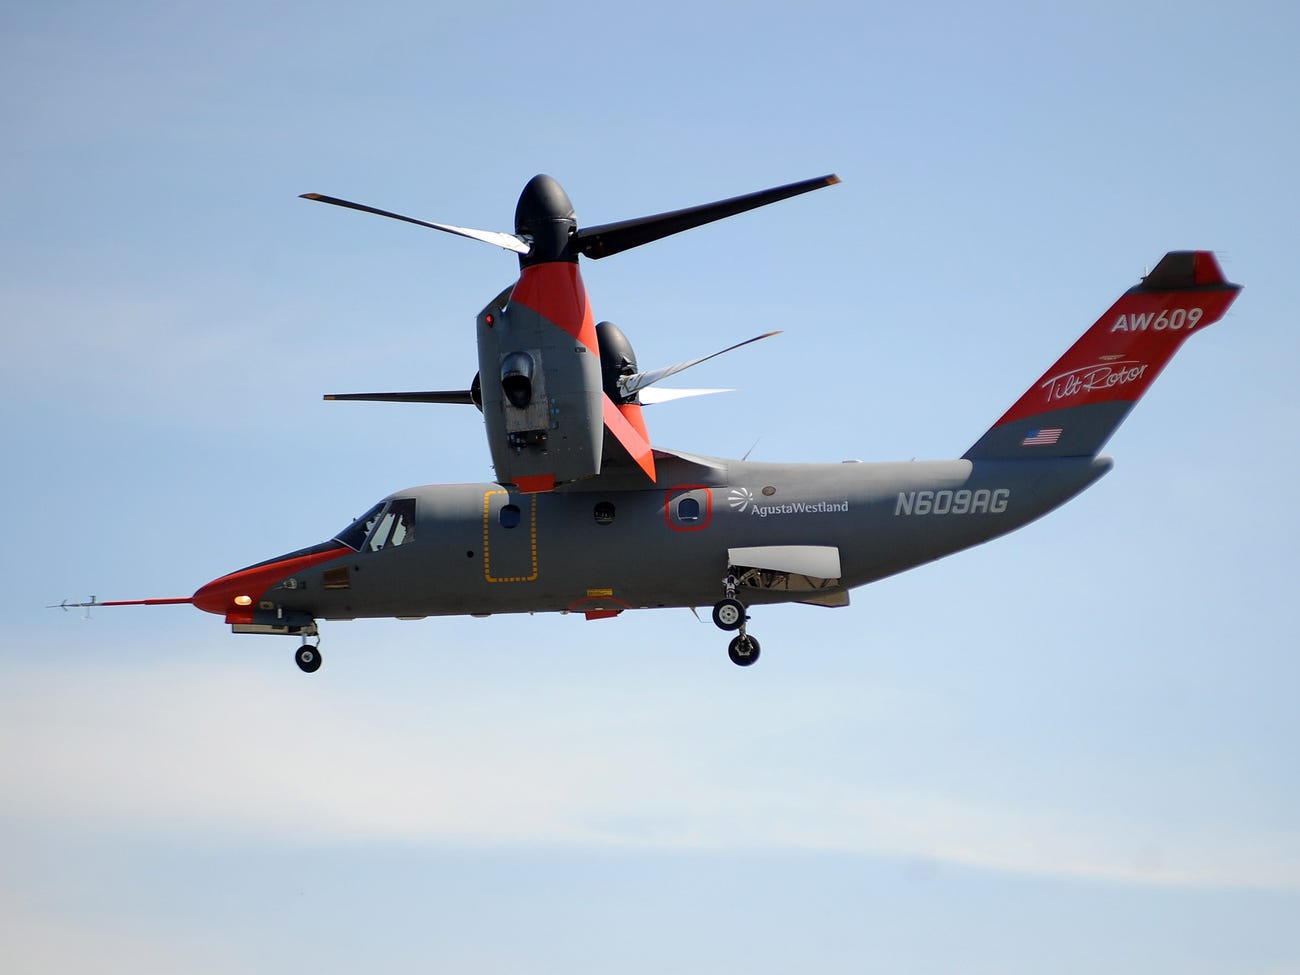 The Italian company will release the first civilian tiltrotor